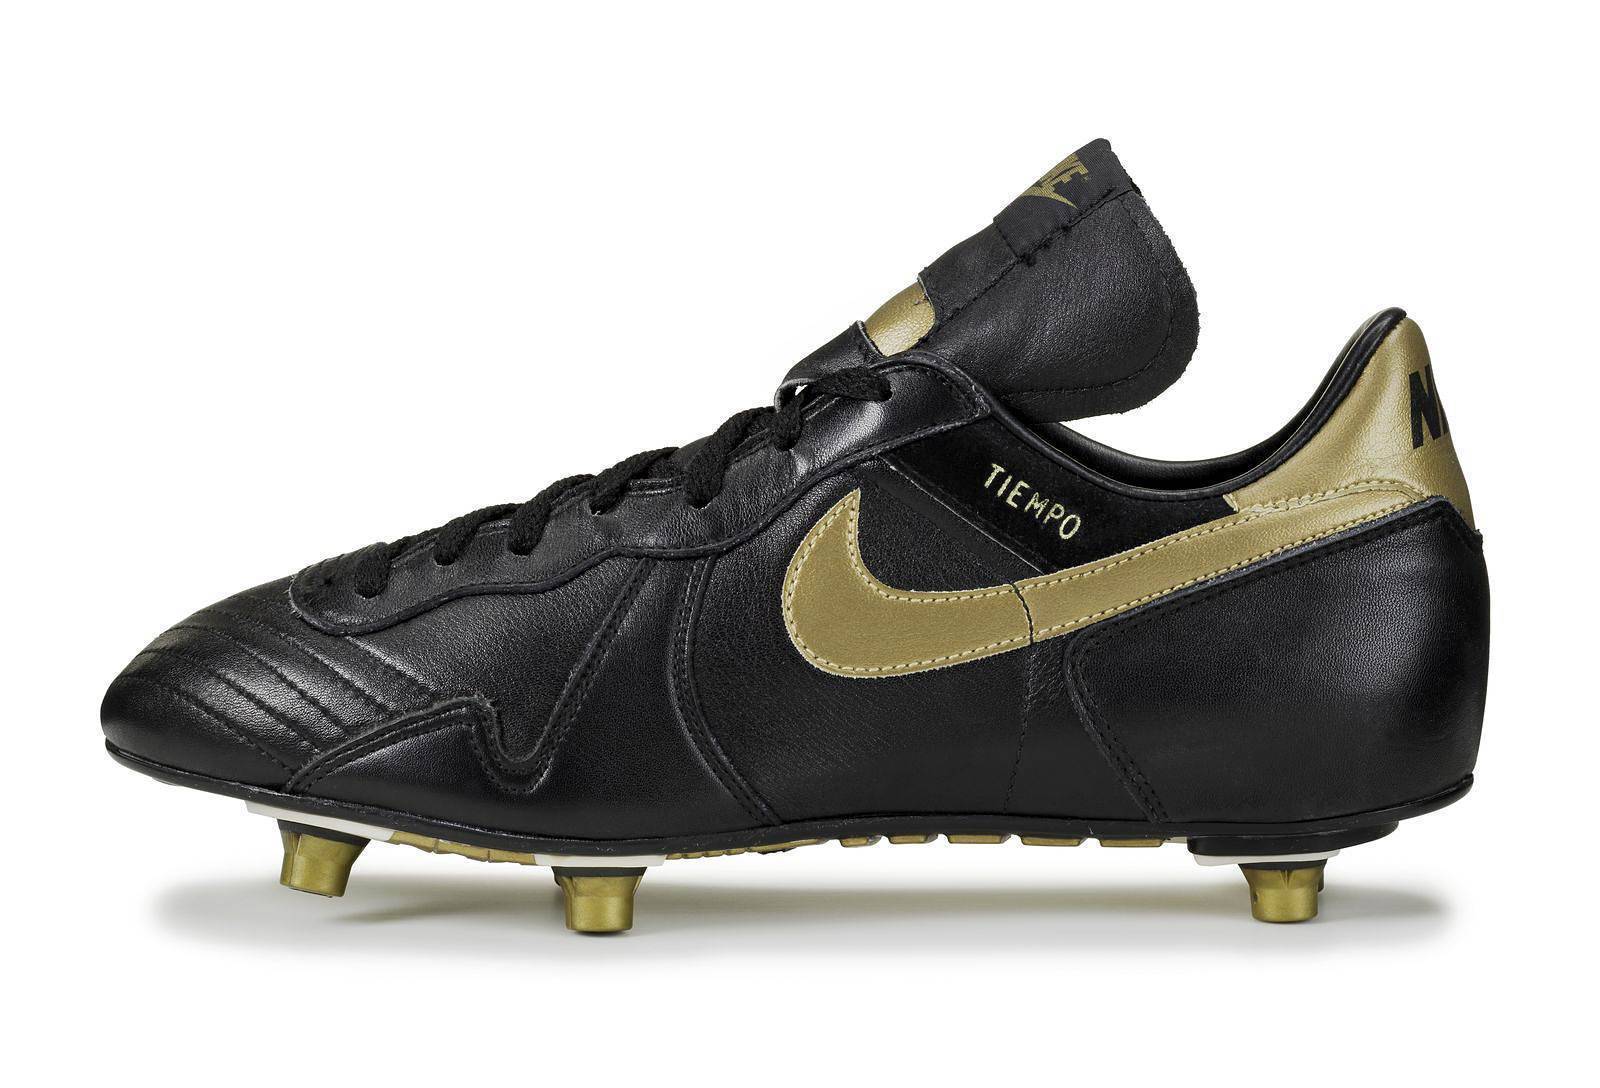 history of the Nike Tiempo - Boots 